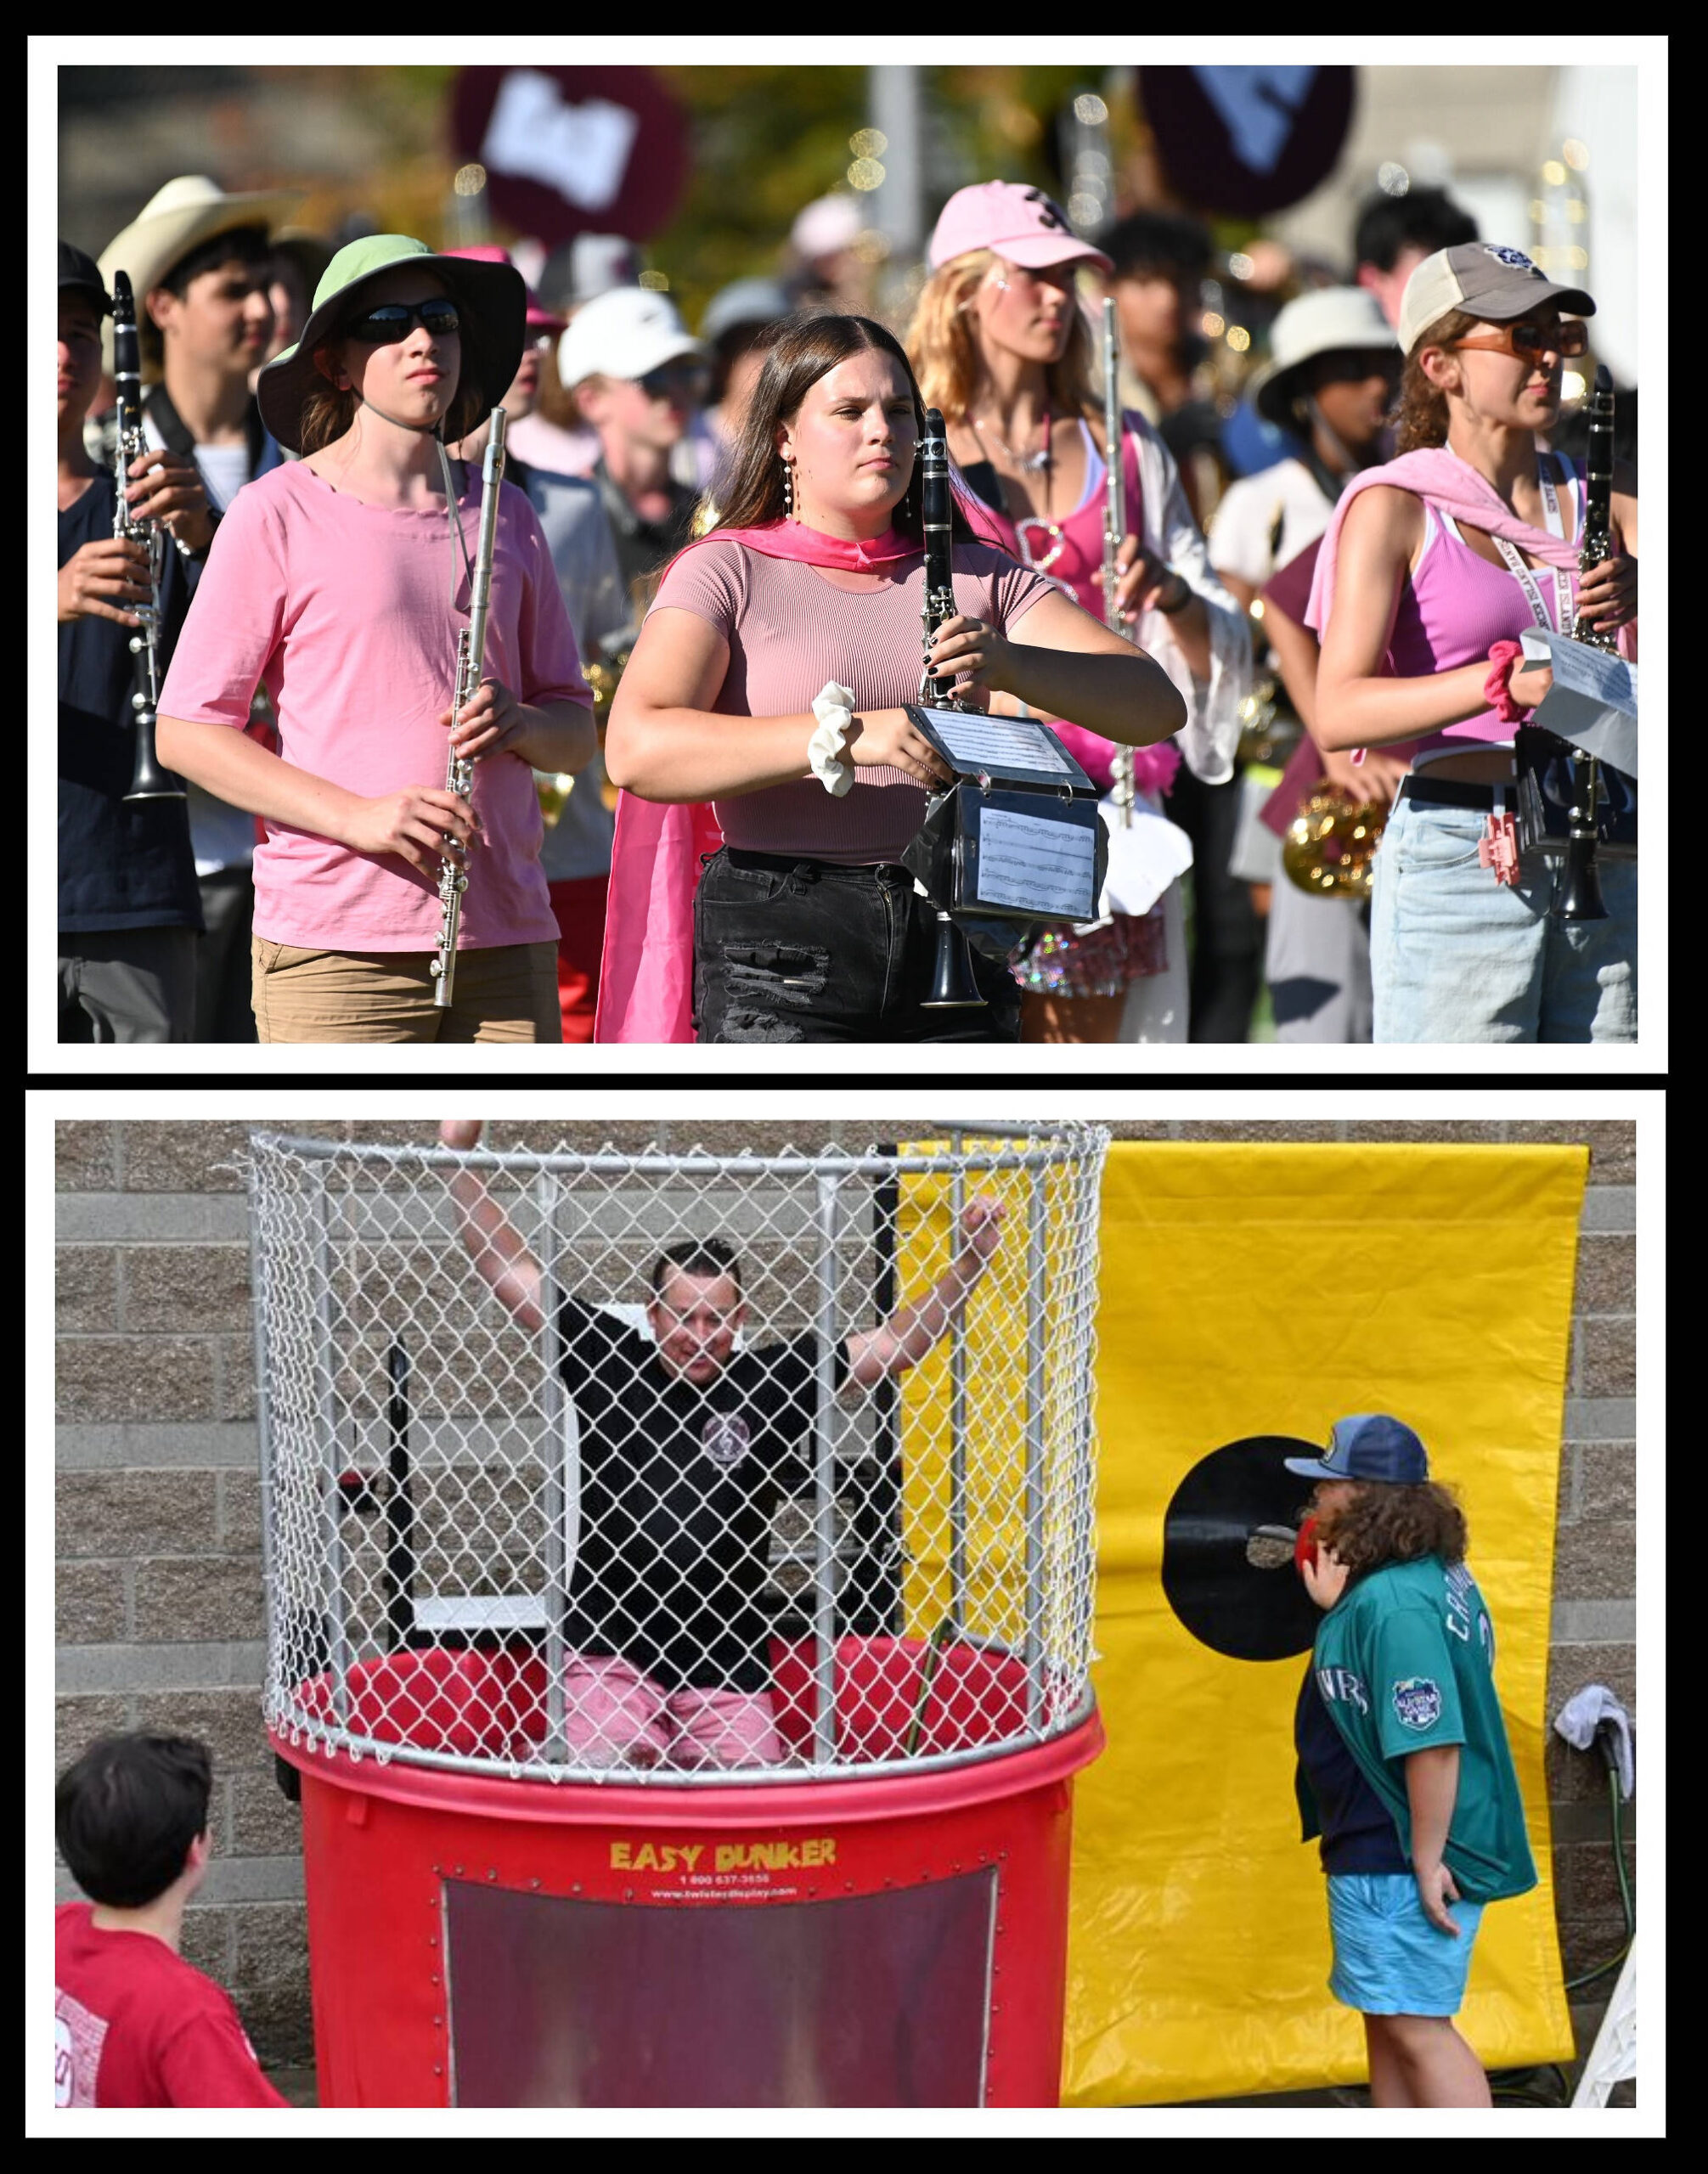 Top: Mercer Island High School (MIHS) clarinet section leader Greta Hykes, middle, joined more than 200 students at a sweltering band camp last week. The marching band got a jump on learning music and moves for the Macy’s Thanksgiving Day Parade in New York this fall. Bottom: MIHS band director Kyle Thompson gets a welcome cooling off at band camp’s famous dunk tank last week. Photos courtesy of James Jantos